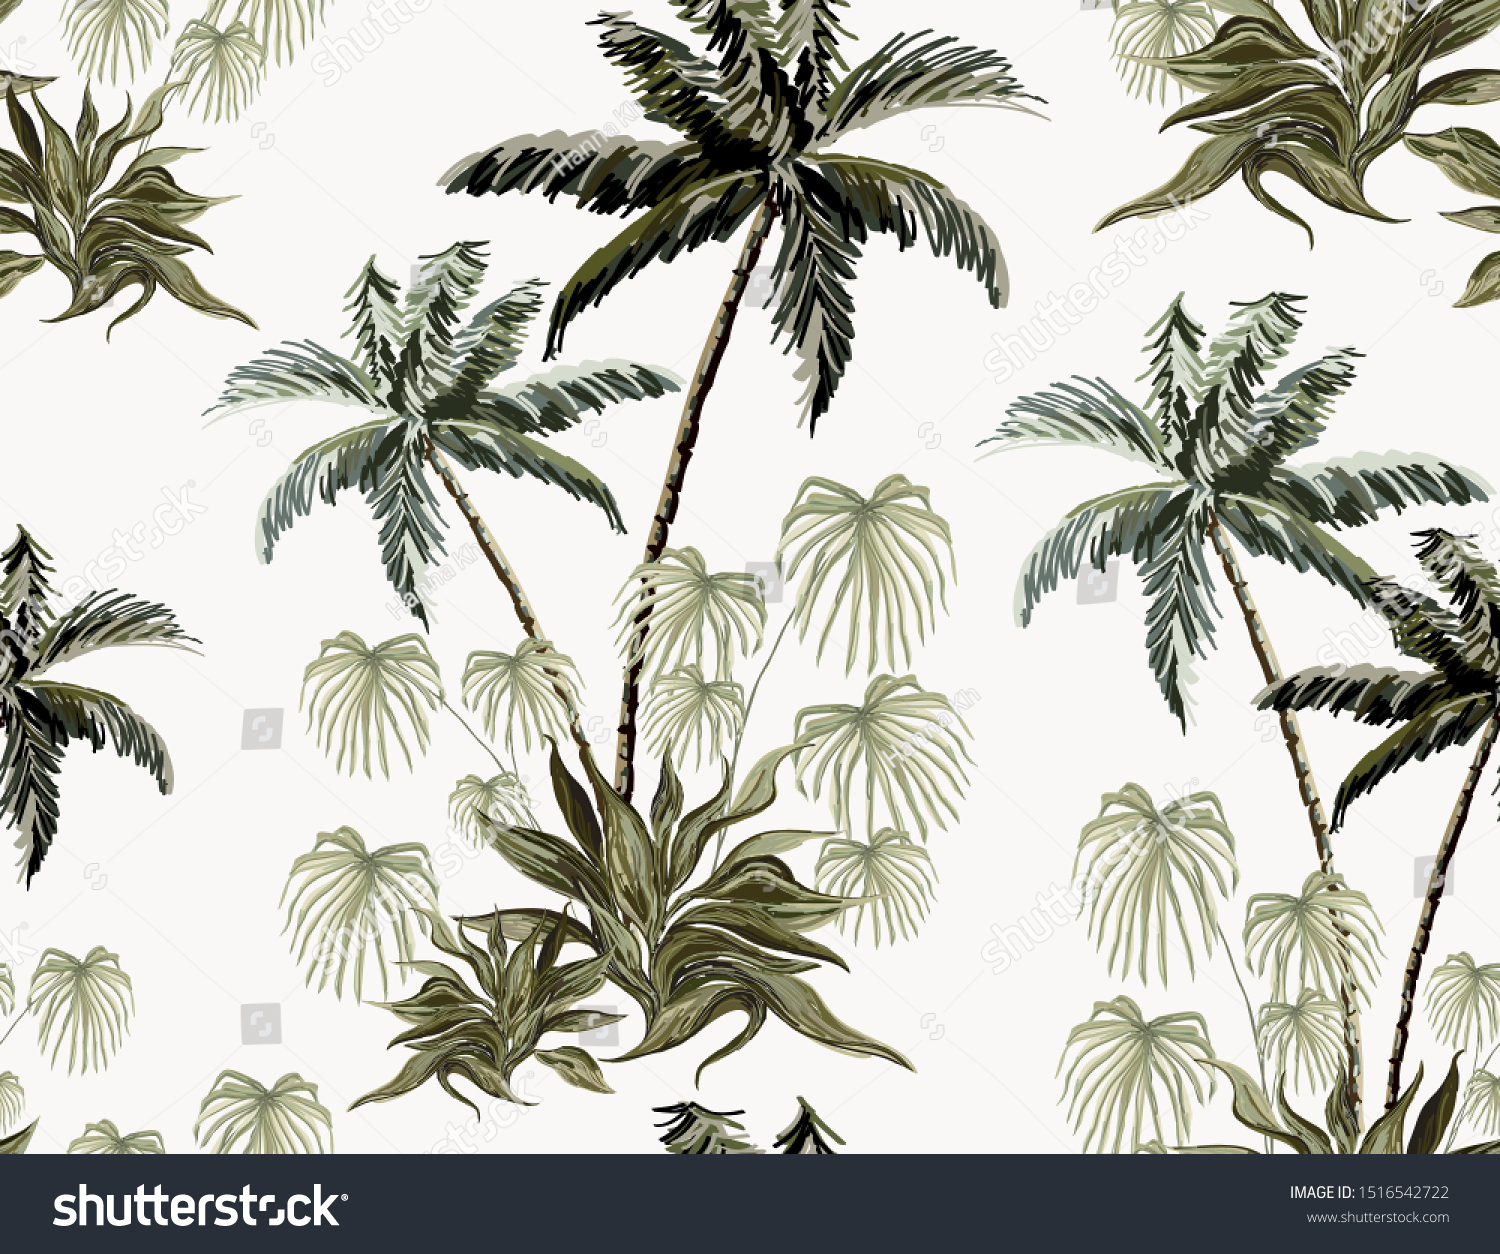 Beautiful Tropical Vintage Palm Trees Floral Stock Vector (Royalty Free ...